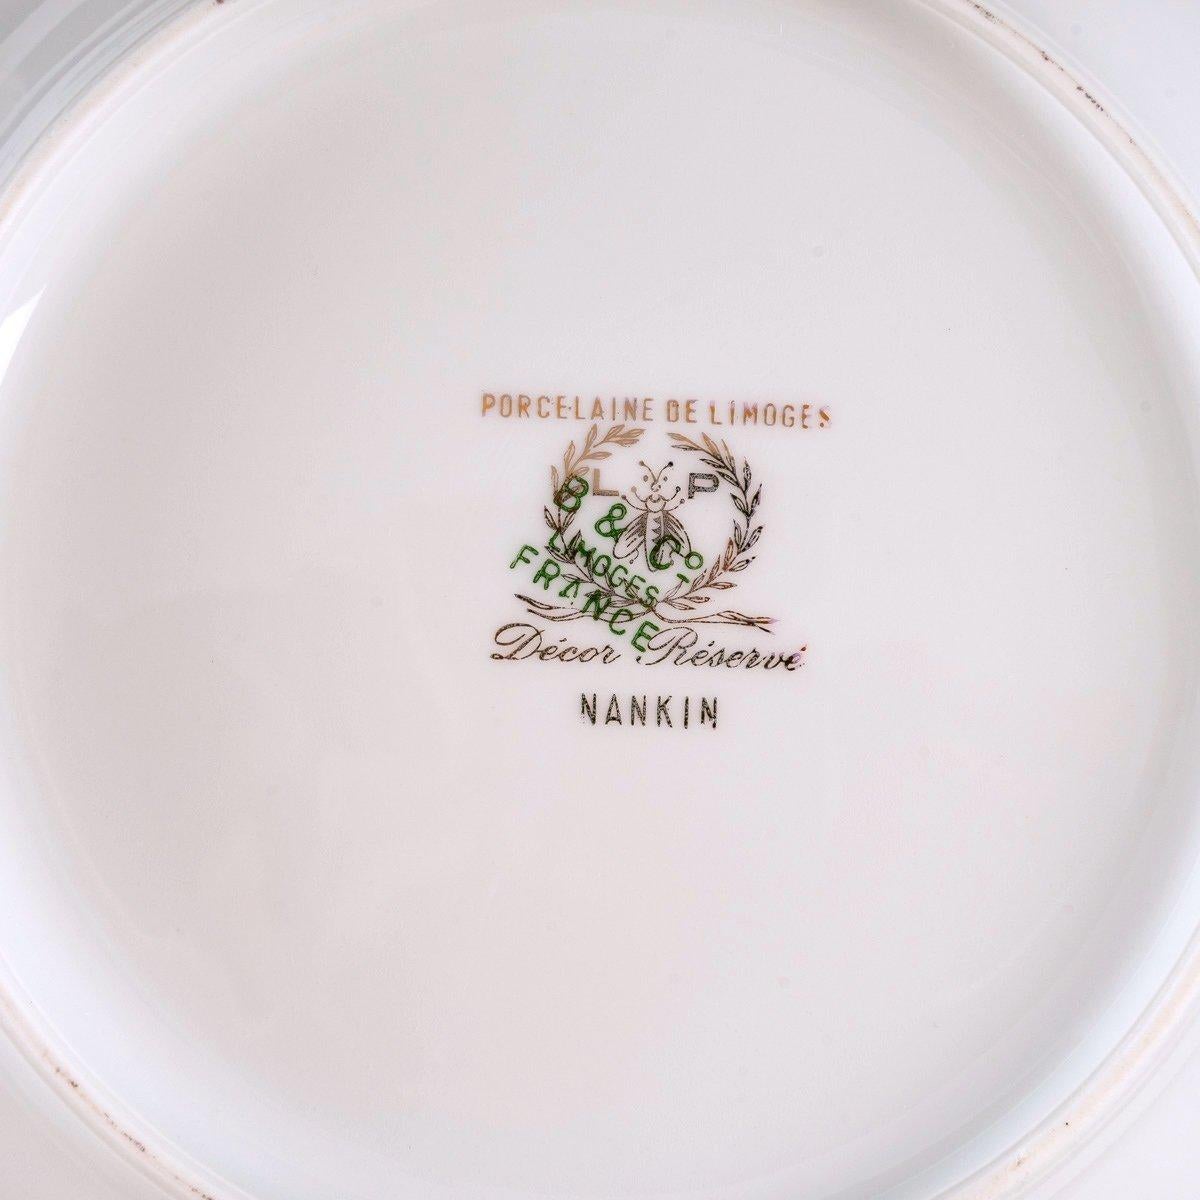 20th Century Service 45 Pieces Limoges, Signed Lp Decorated Reserved Nanjing, The Dignitari For Sale